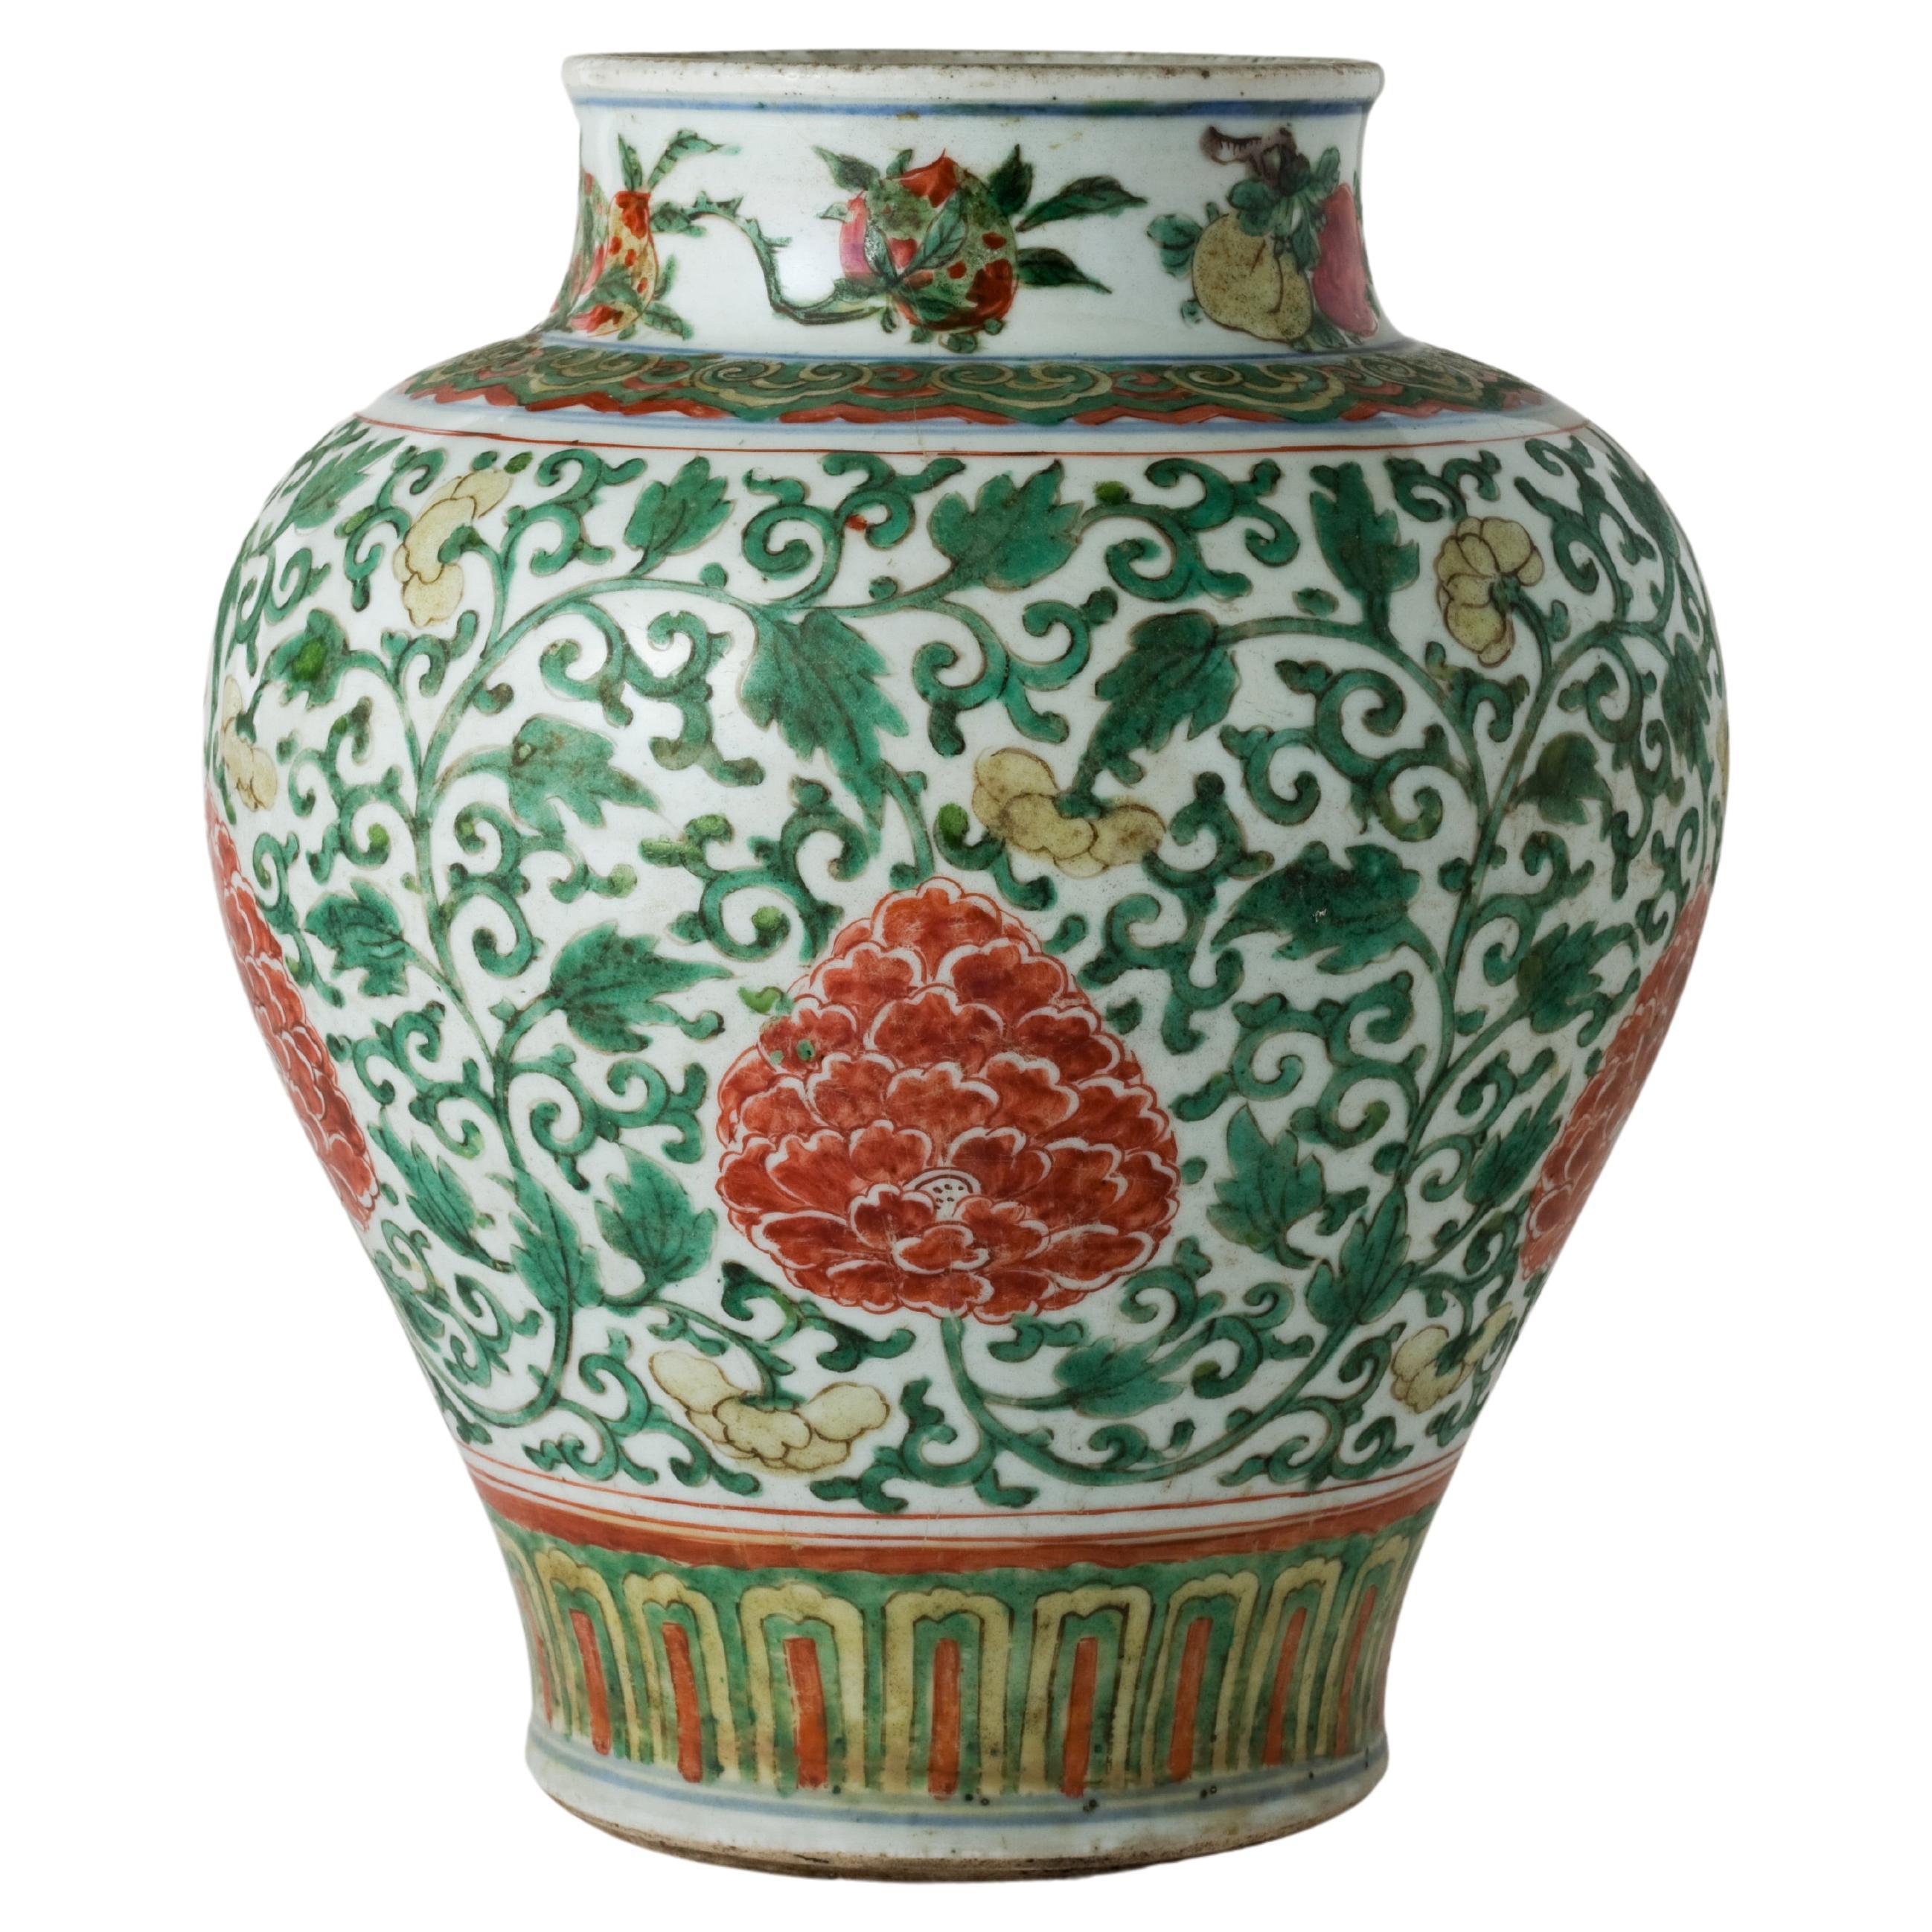 A Wucai 'Peony' Vase Transitional Period, 17th century, Early Qing Dynasty For Sale